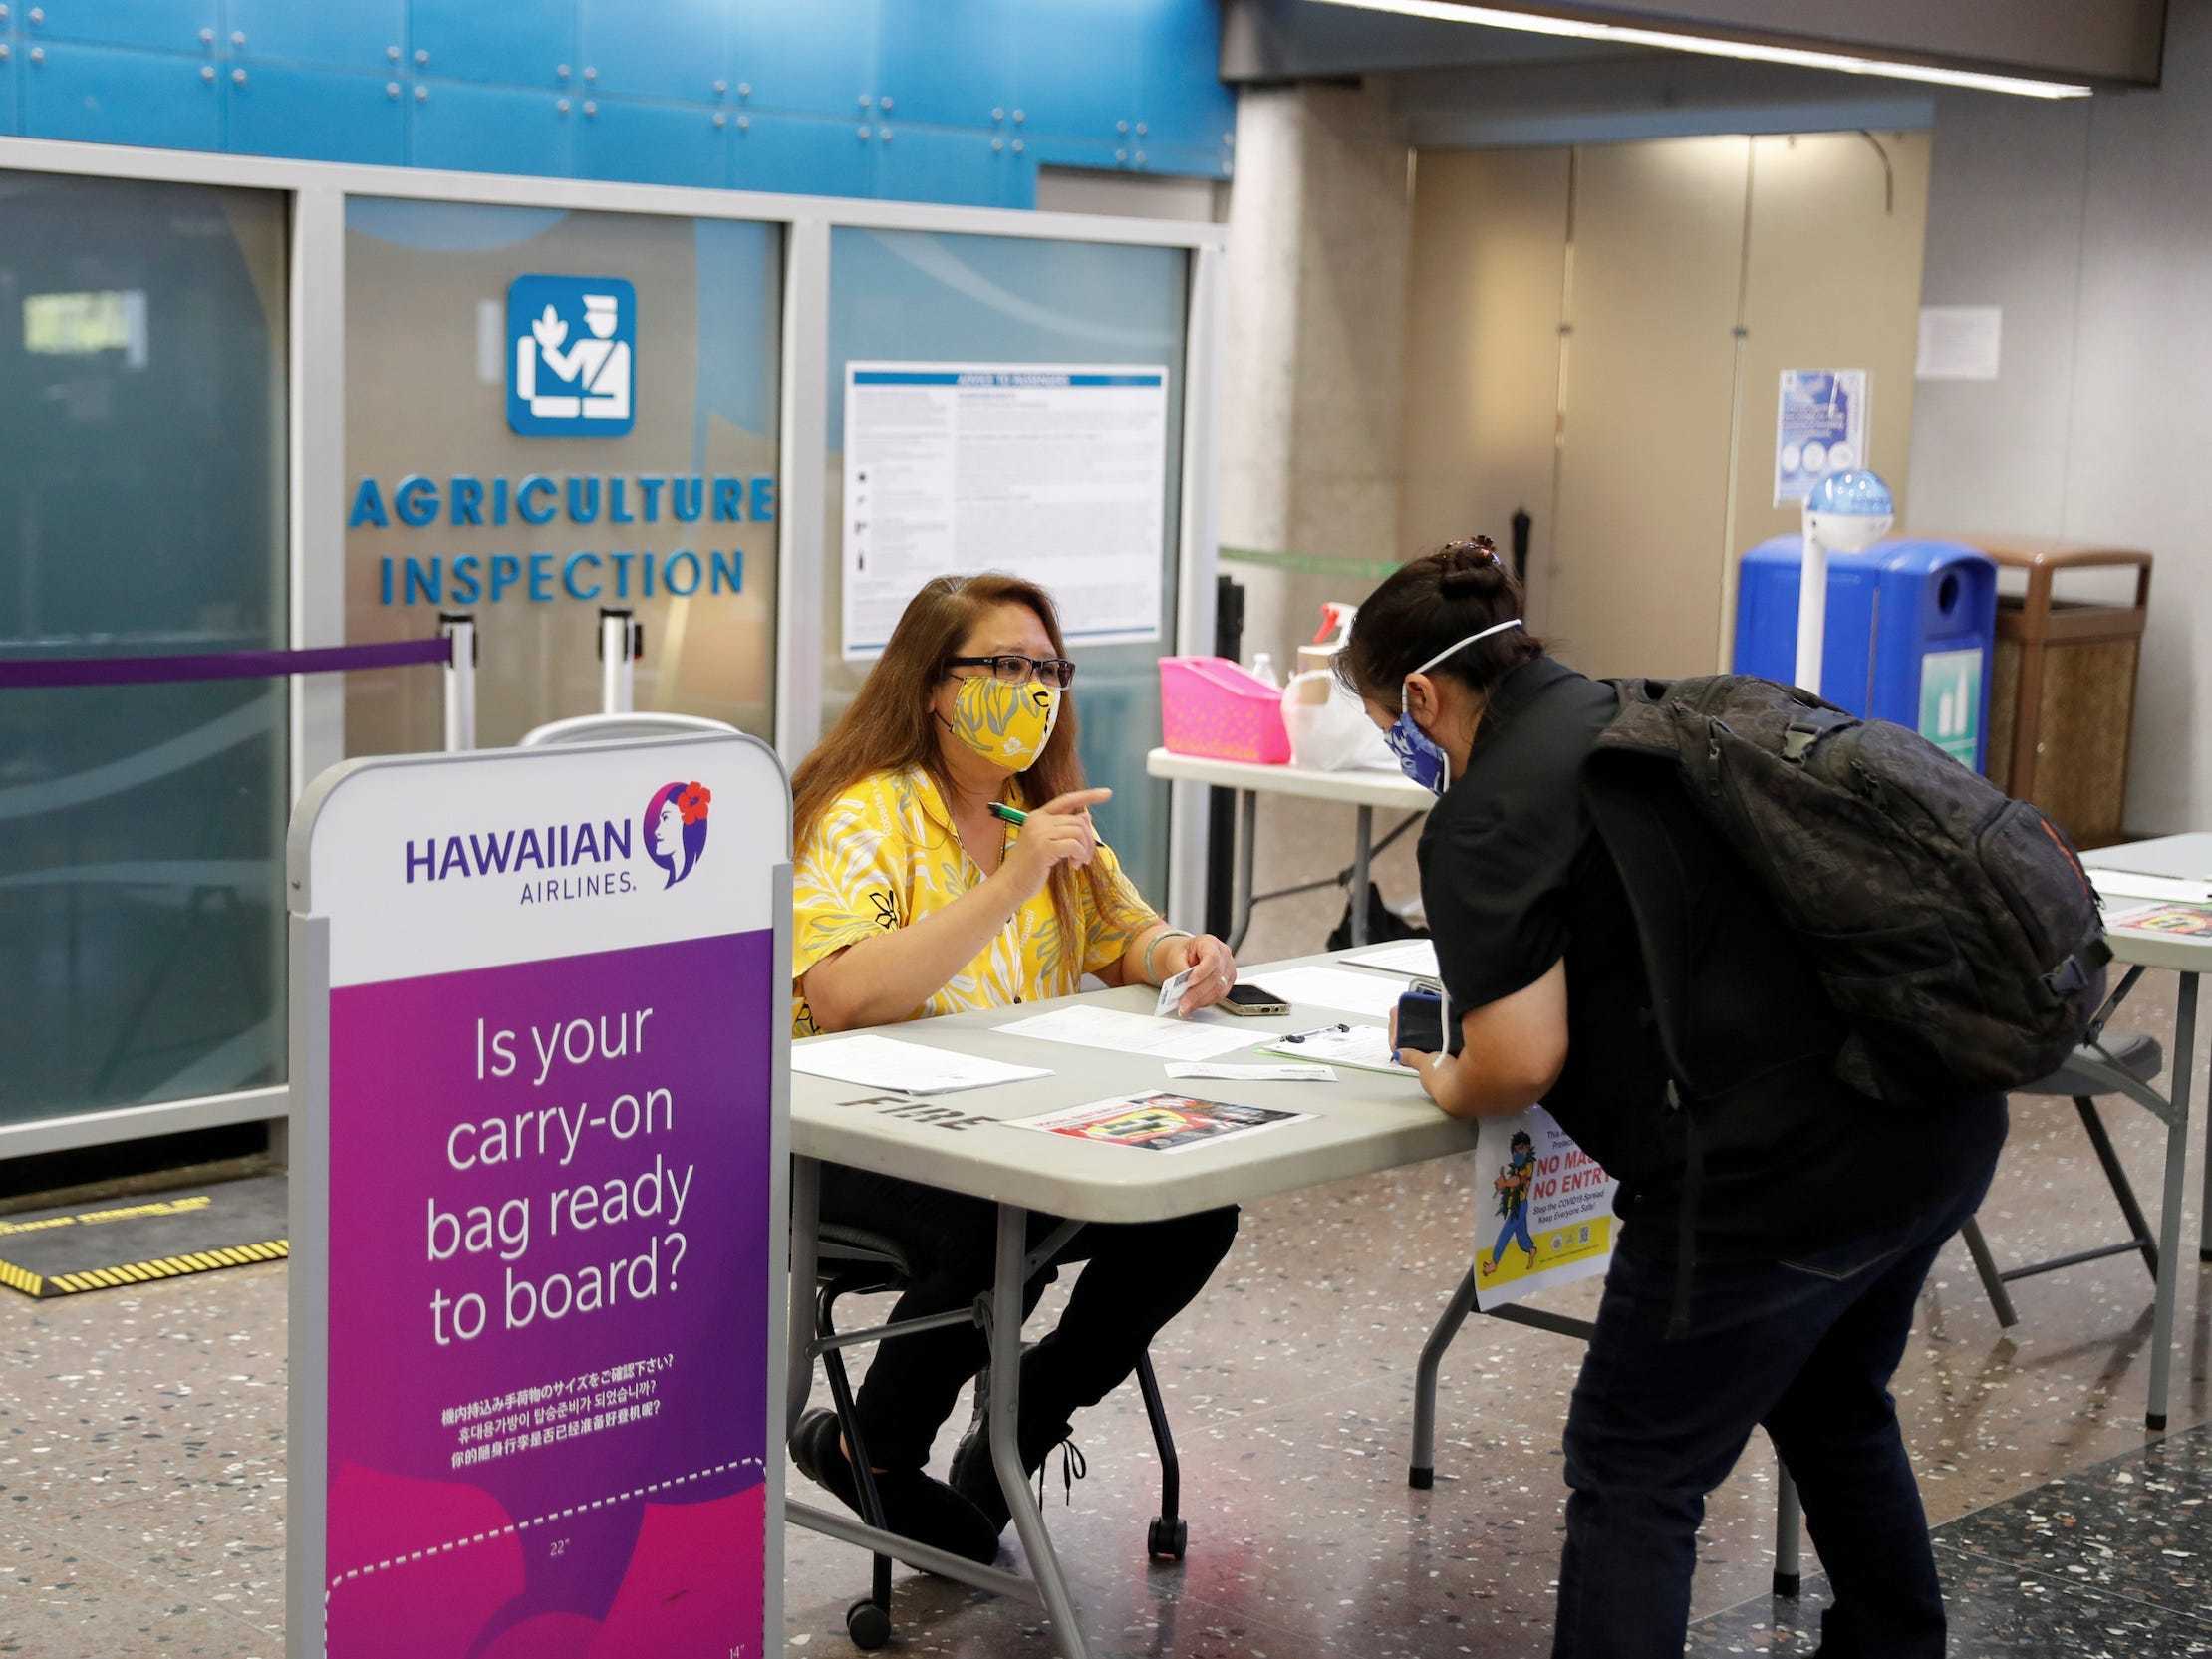 A traveler checks in with airport authorities at the Daniel K. Inouye International Airport during the spread of the coronavirus disease (COVID-19) in Honolulu, Hawaii, U.S., April 28, 2020. Picture taken April 28, 2020.